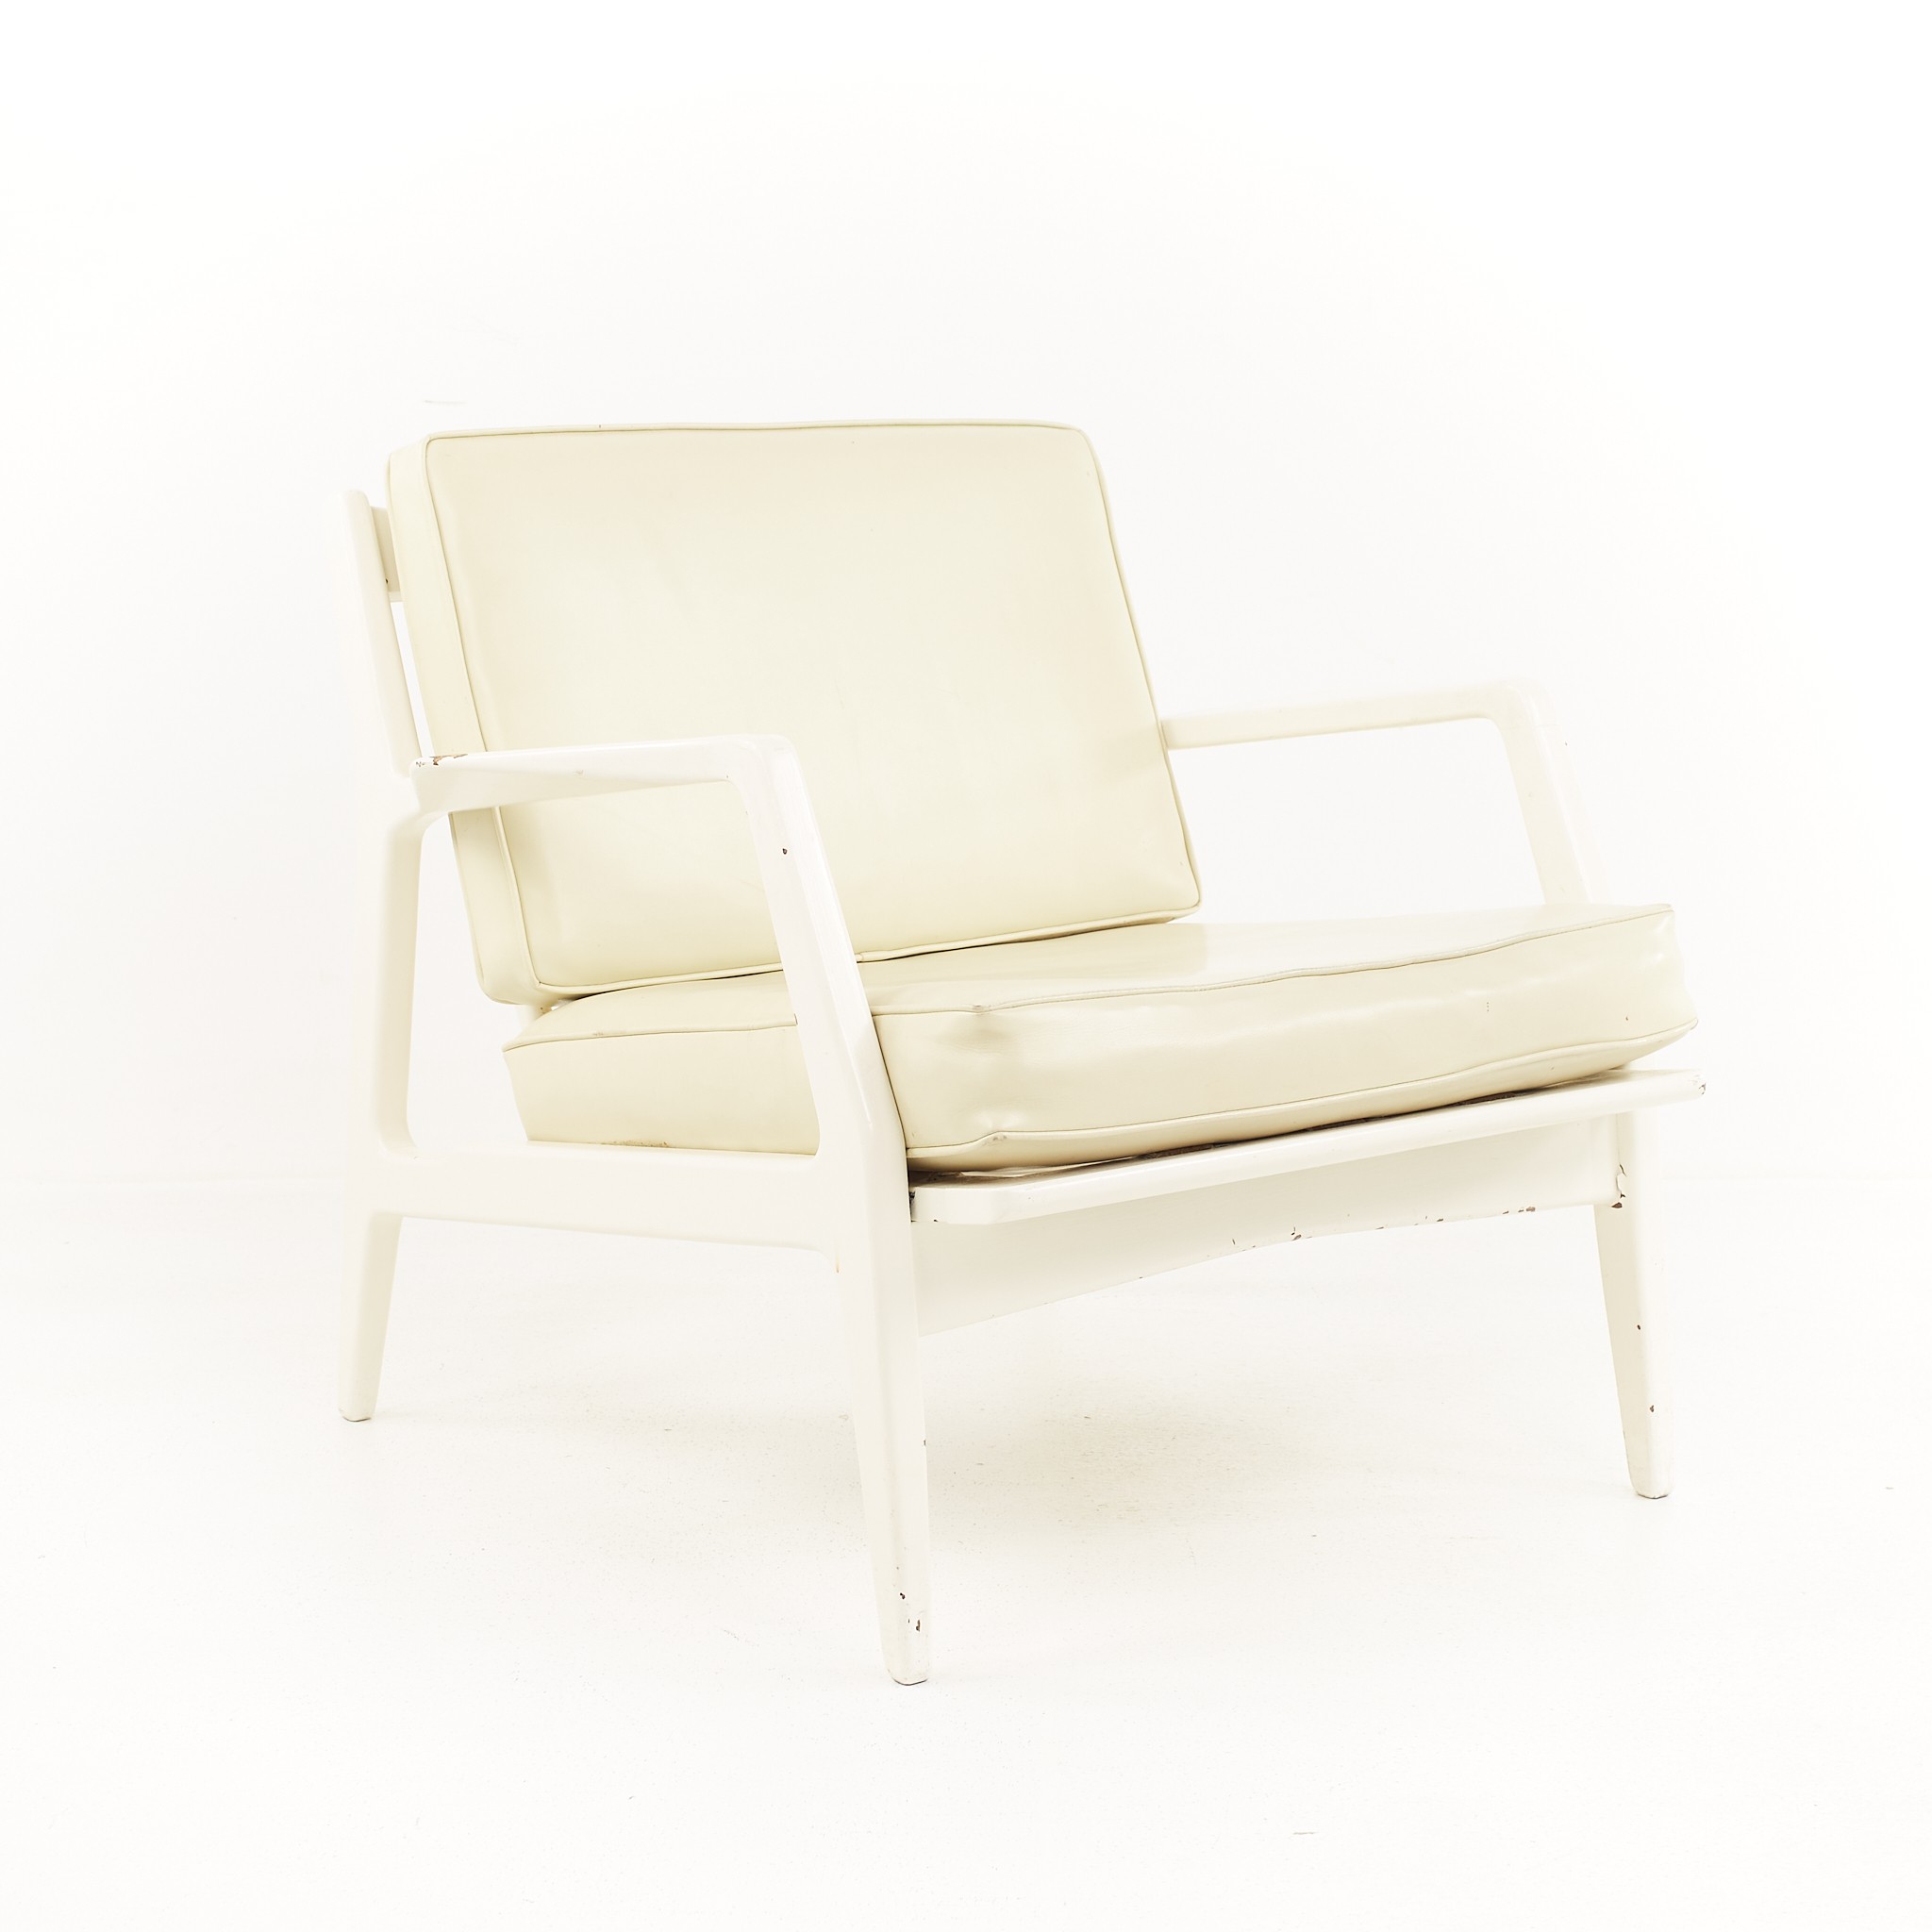 Lawrence Peabody Mid Century Lounge Chair